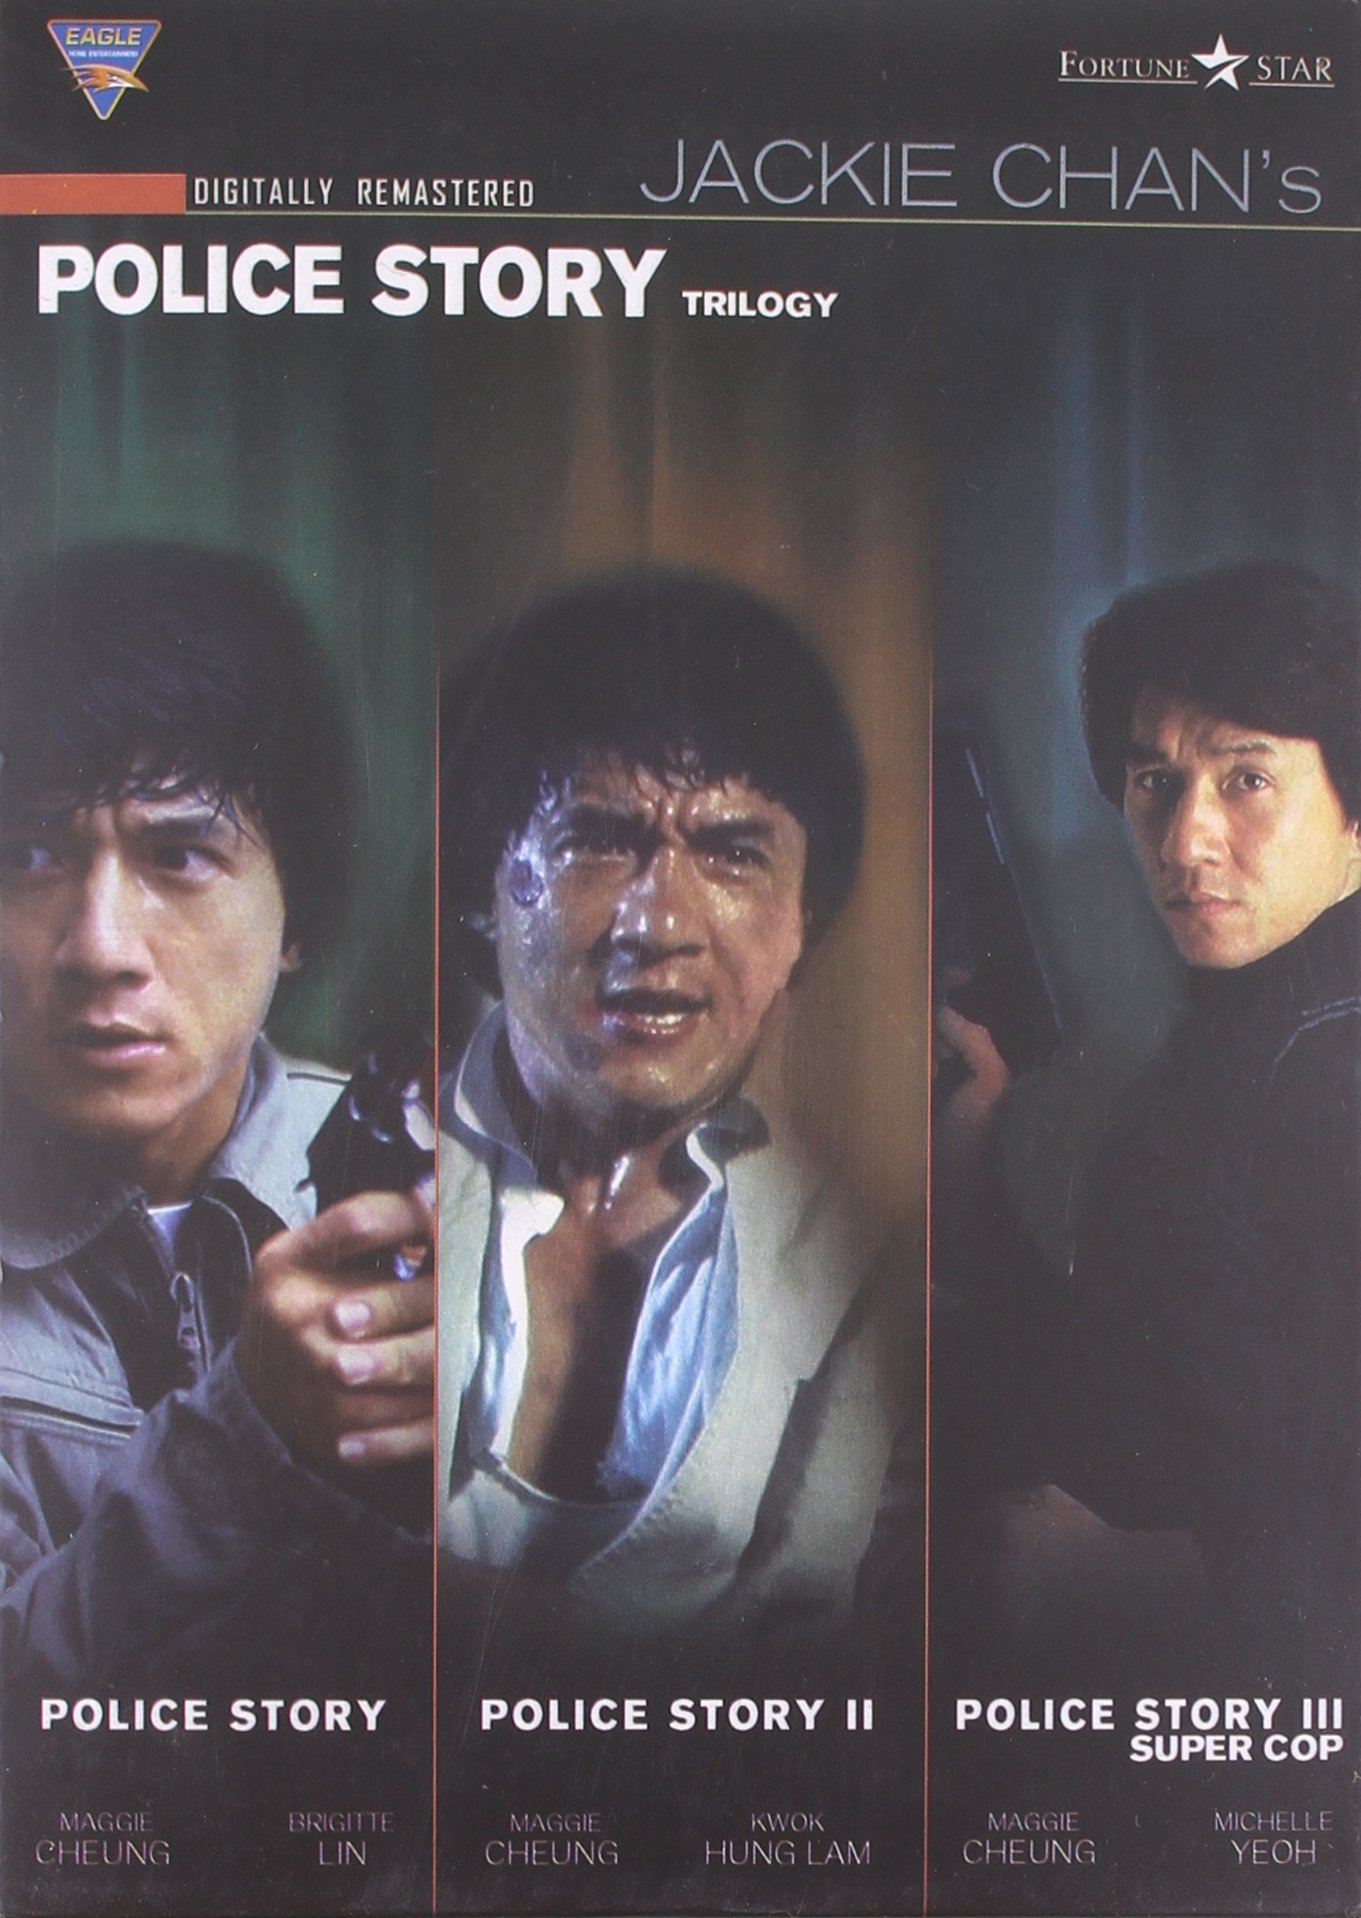 police-story-trilogy-movie-purchase-or-watch-online